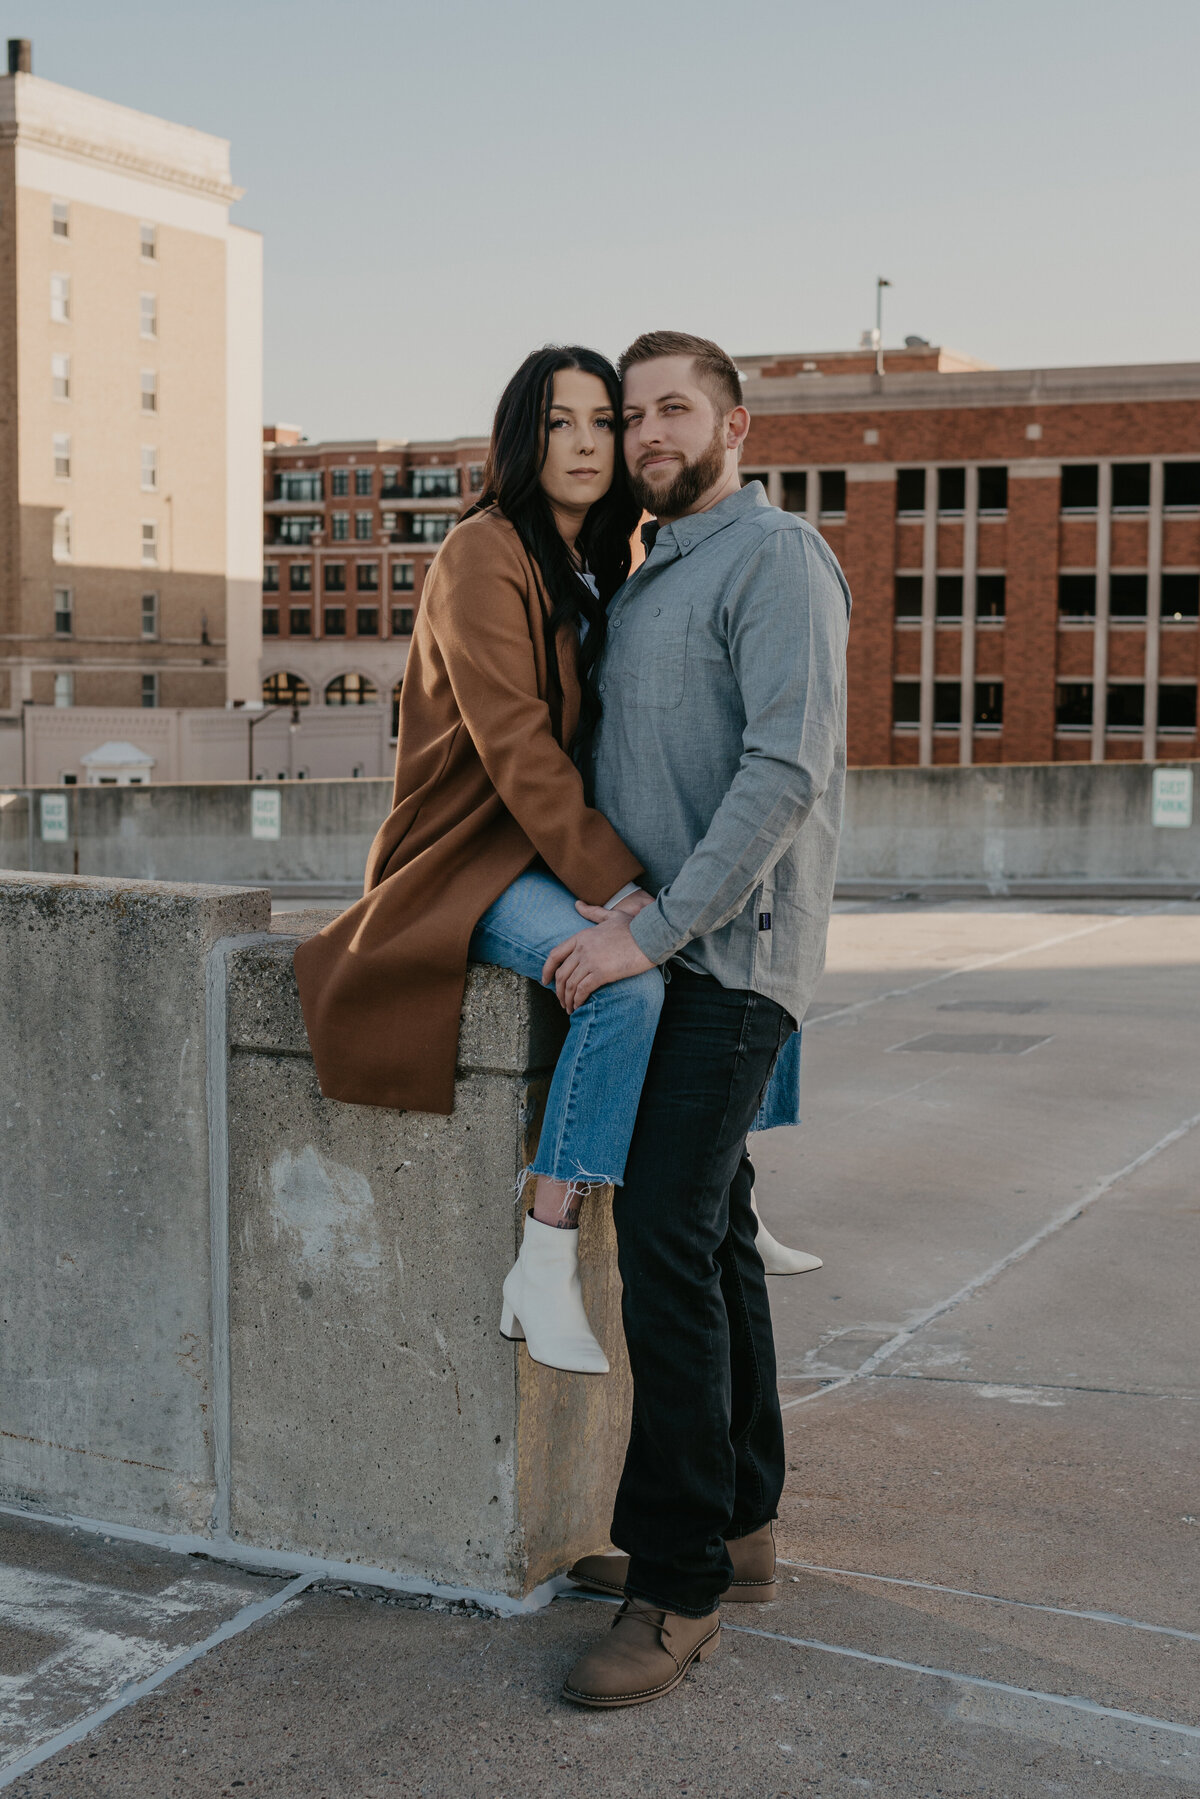 City engagement session during sunset downtown Wausau